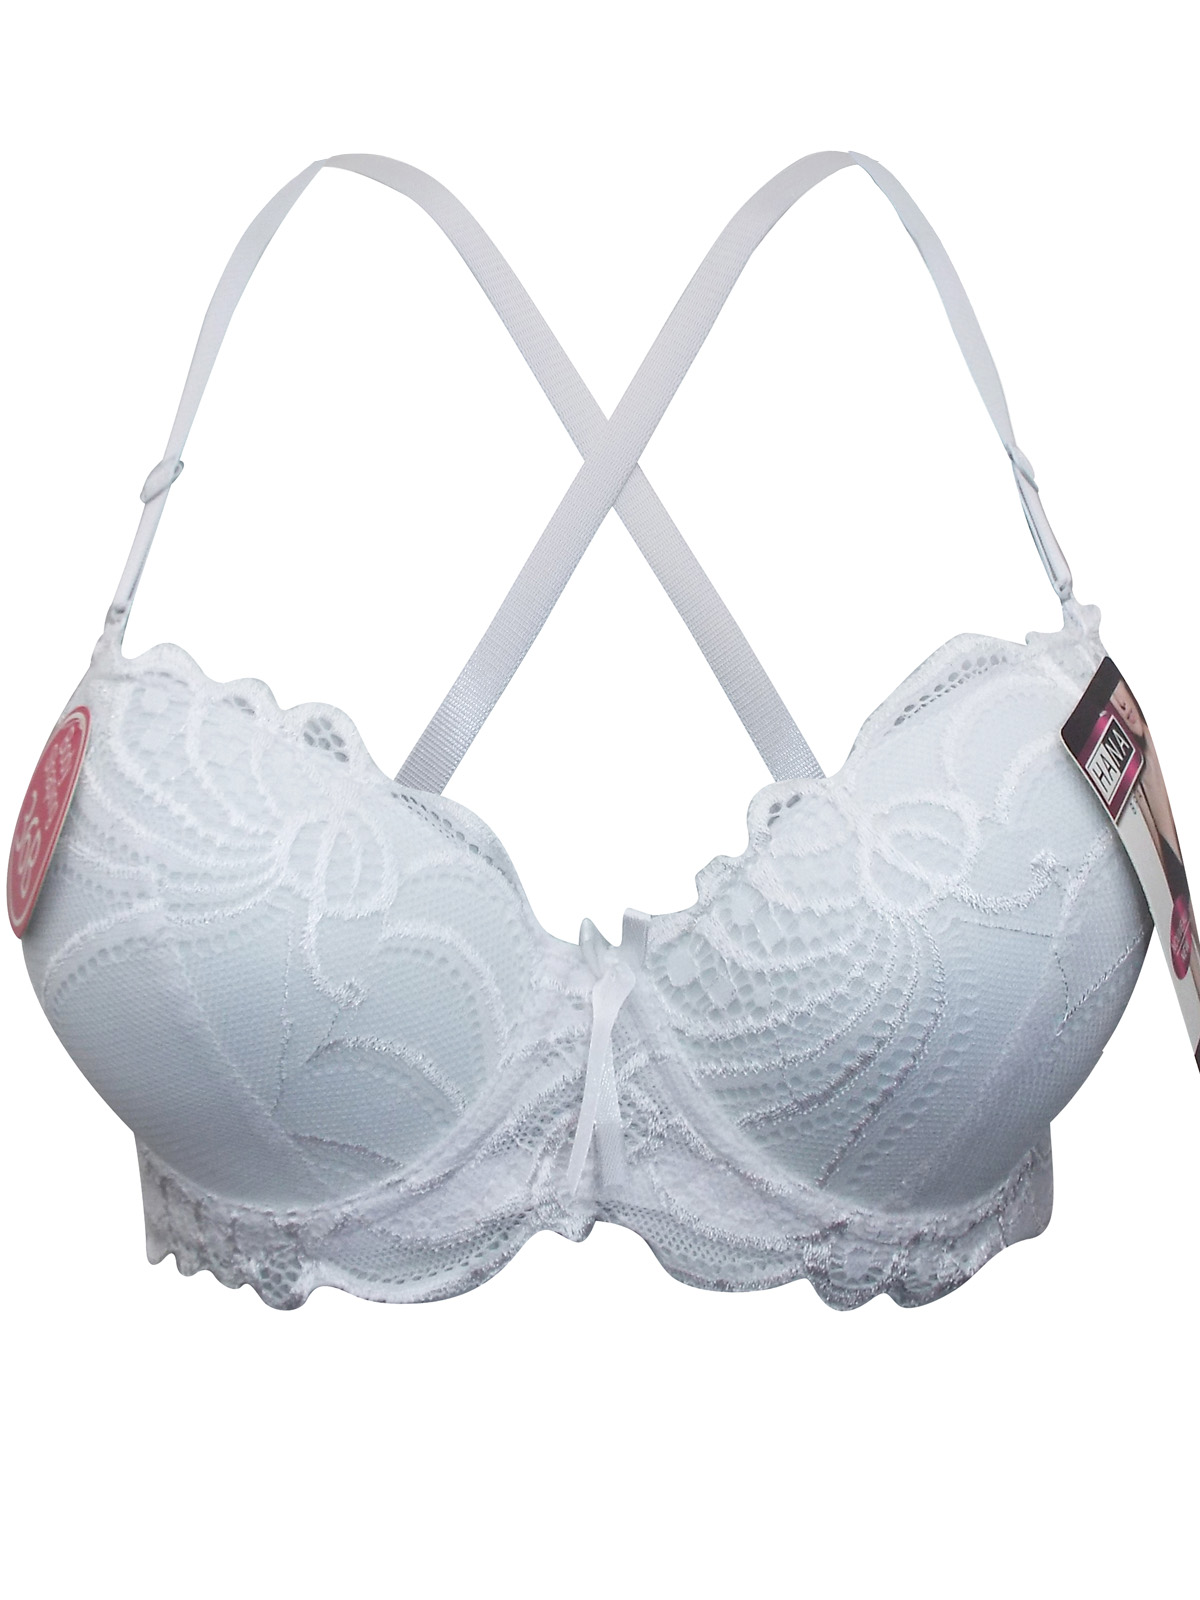 Hana - - Hana WHITE Floral Lace Padded & Wired Body Shaping Multiway ...